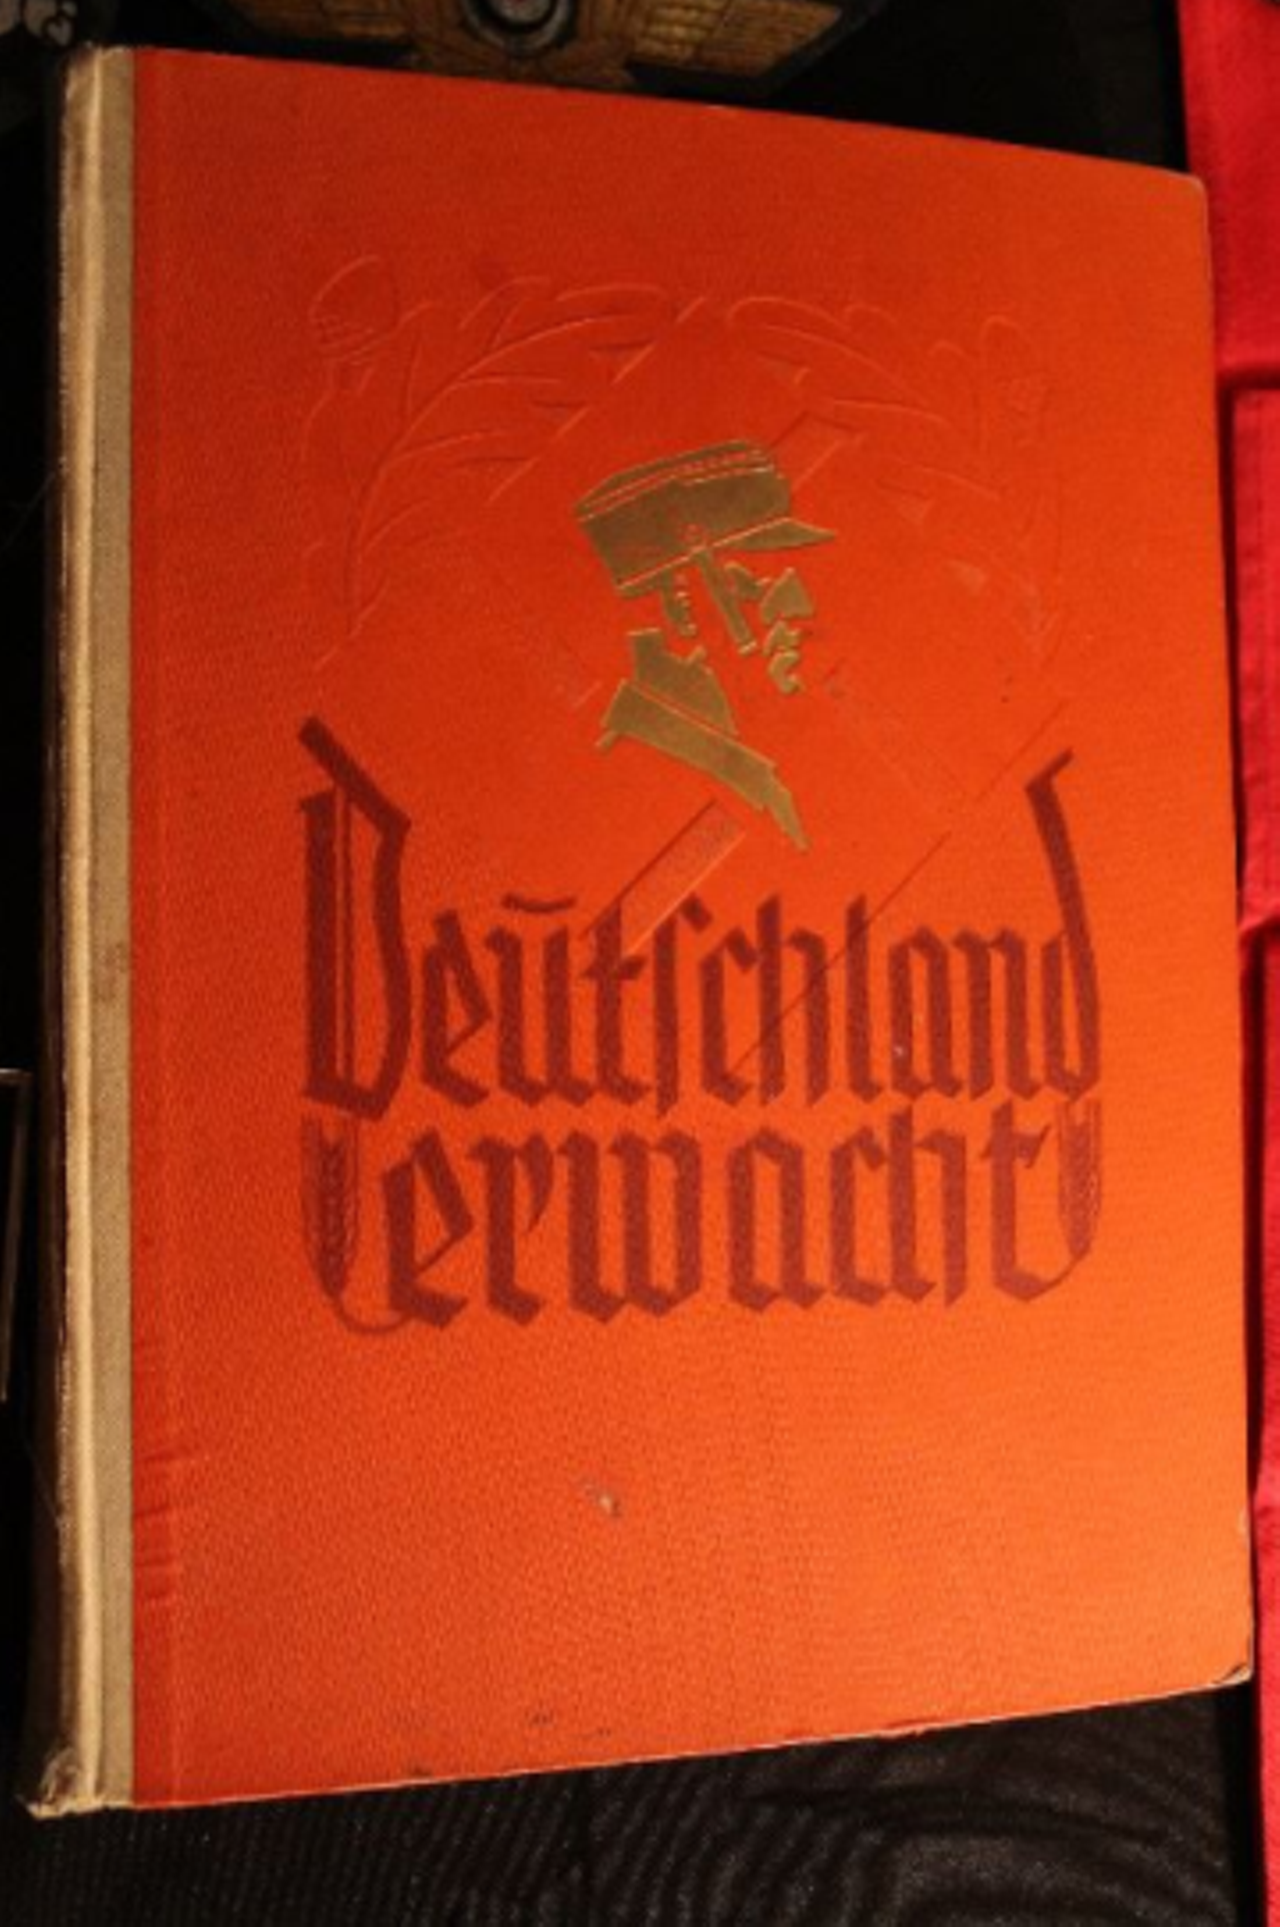 And we'll throw in this early Nazi propaganda tome for good measure.